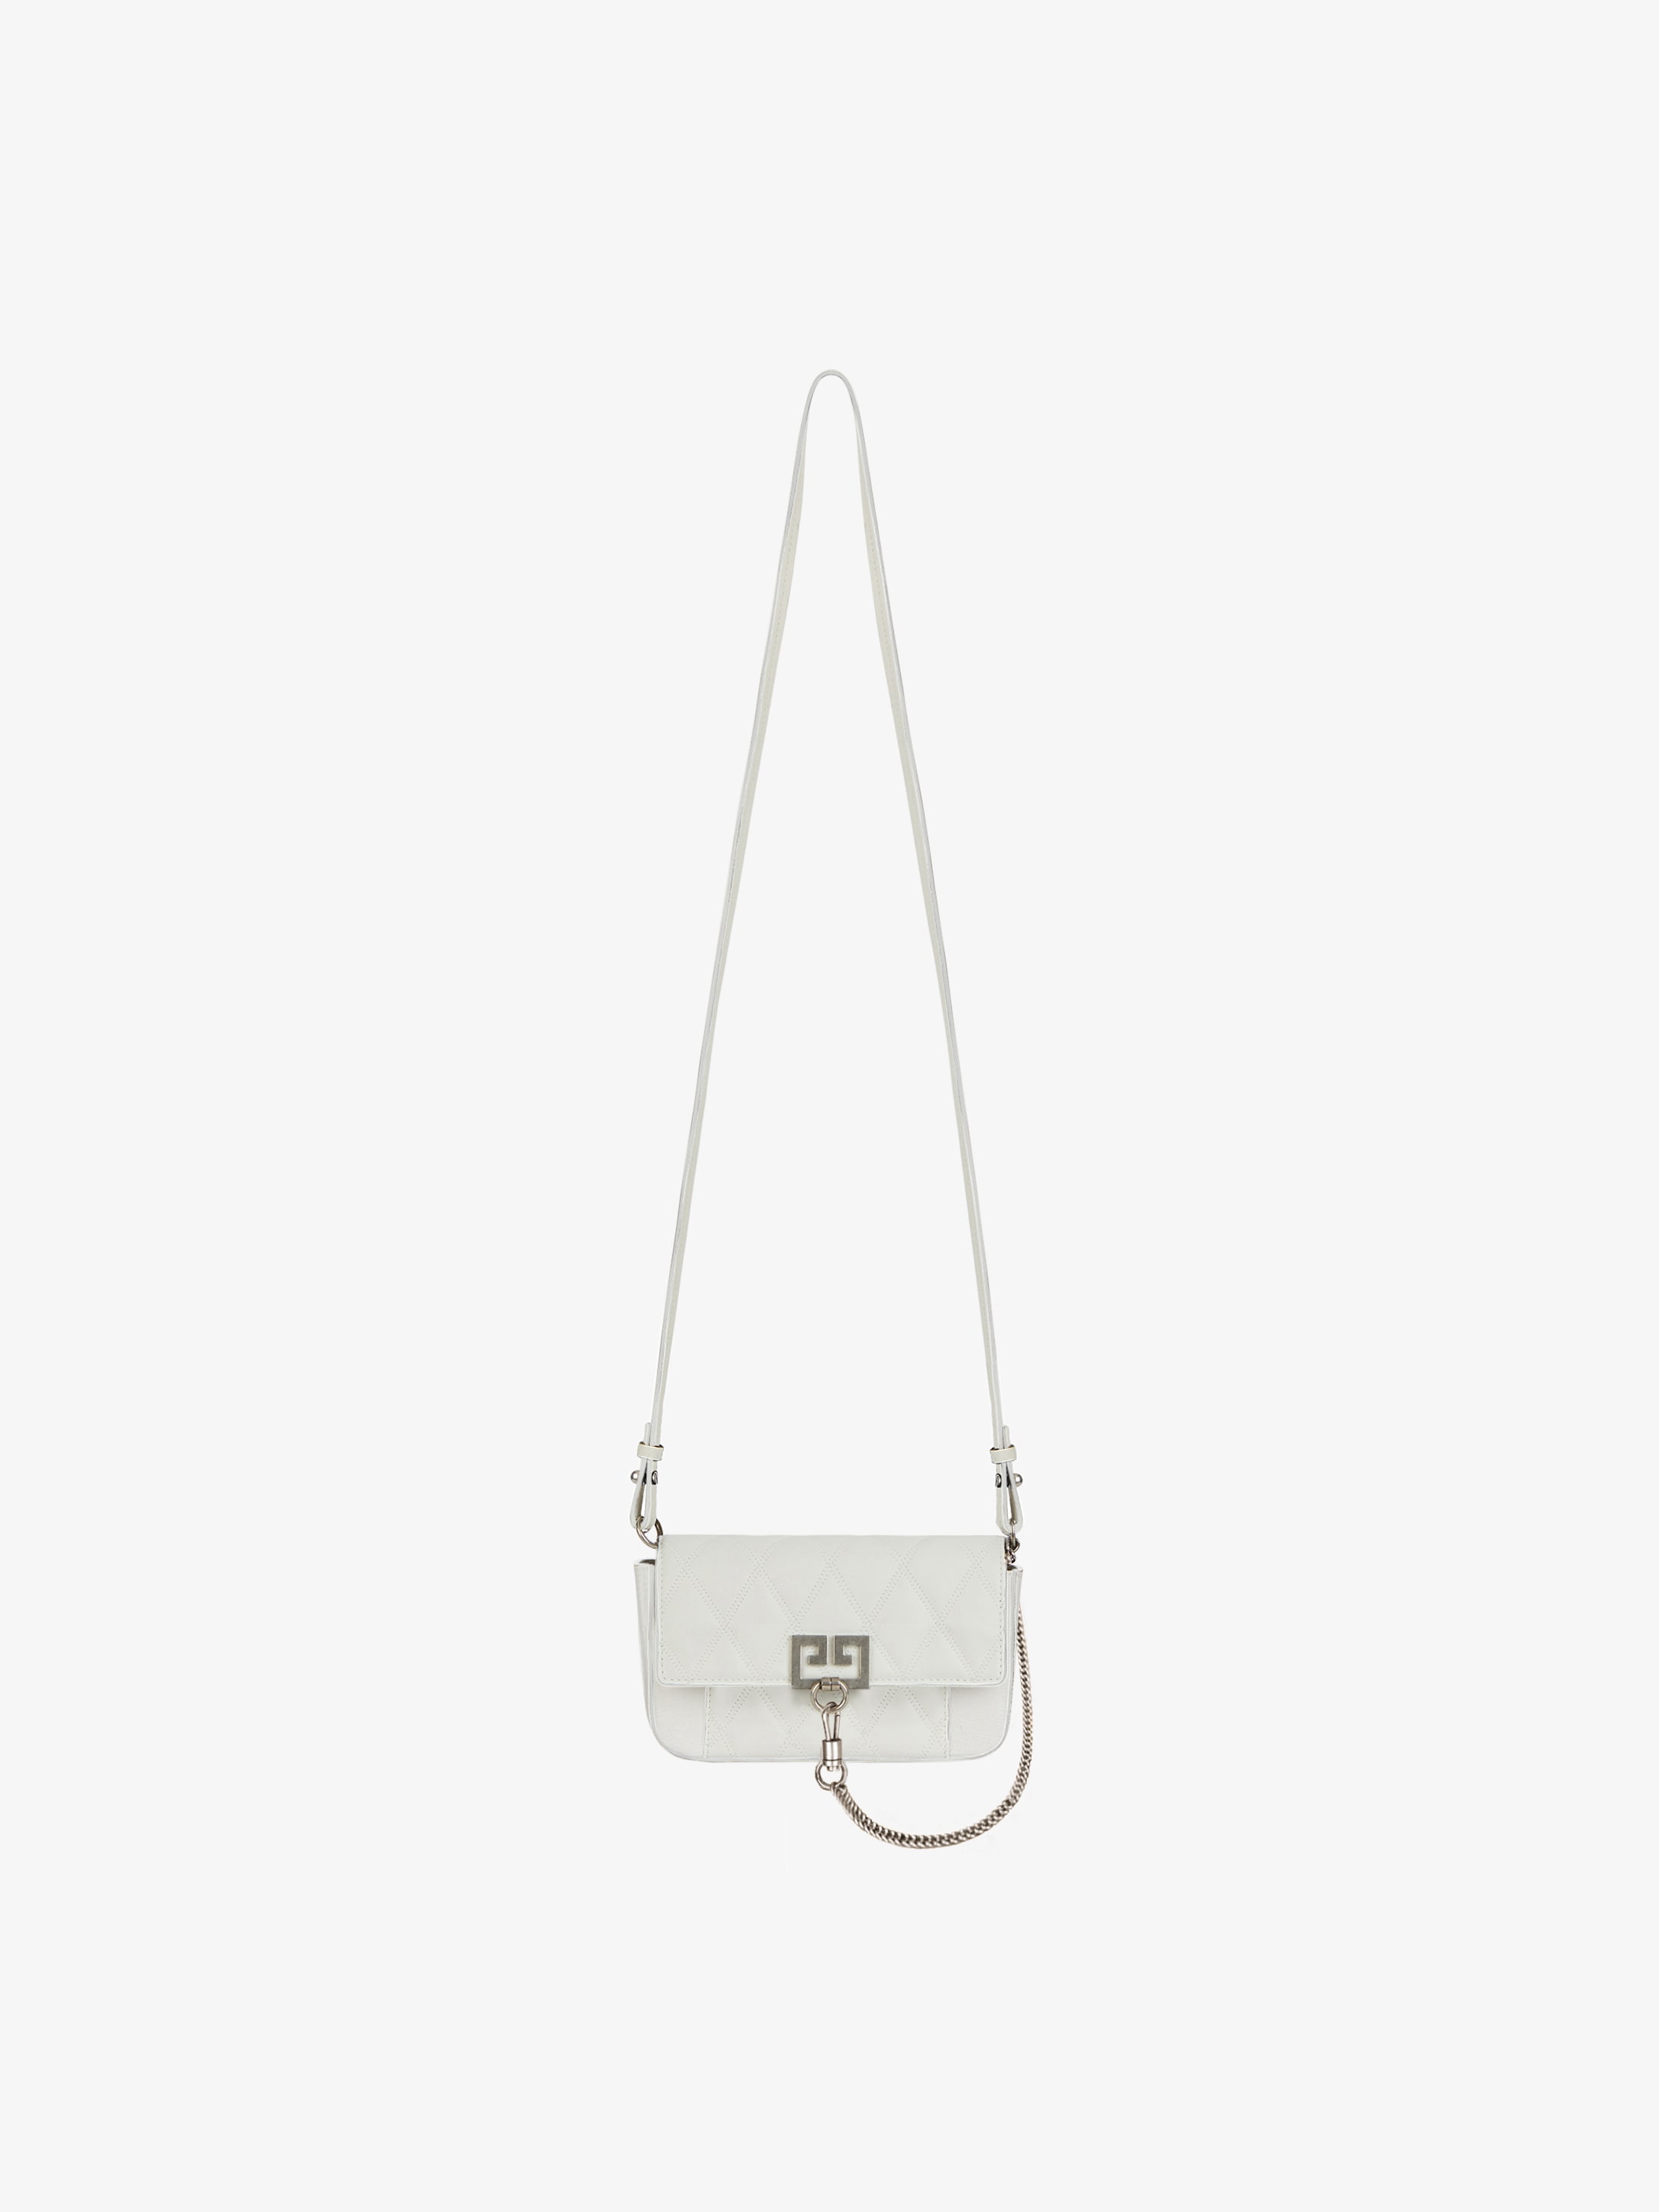 Mini Pocket bag in diamond quilted leather | GIVENCHY Paris